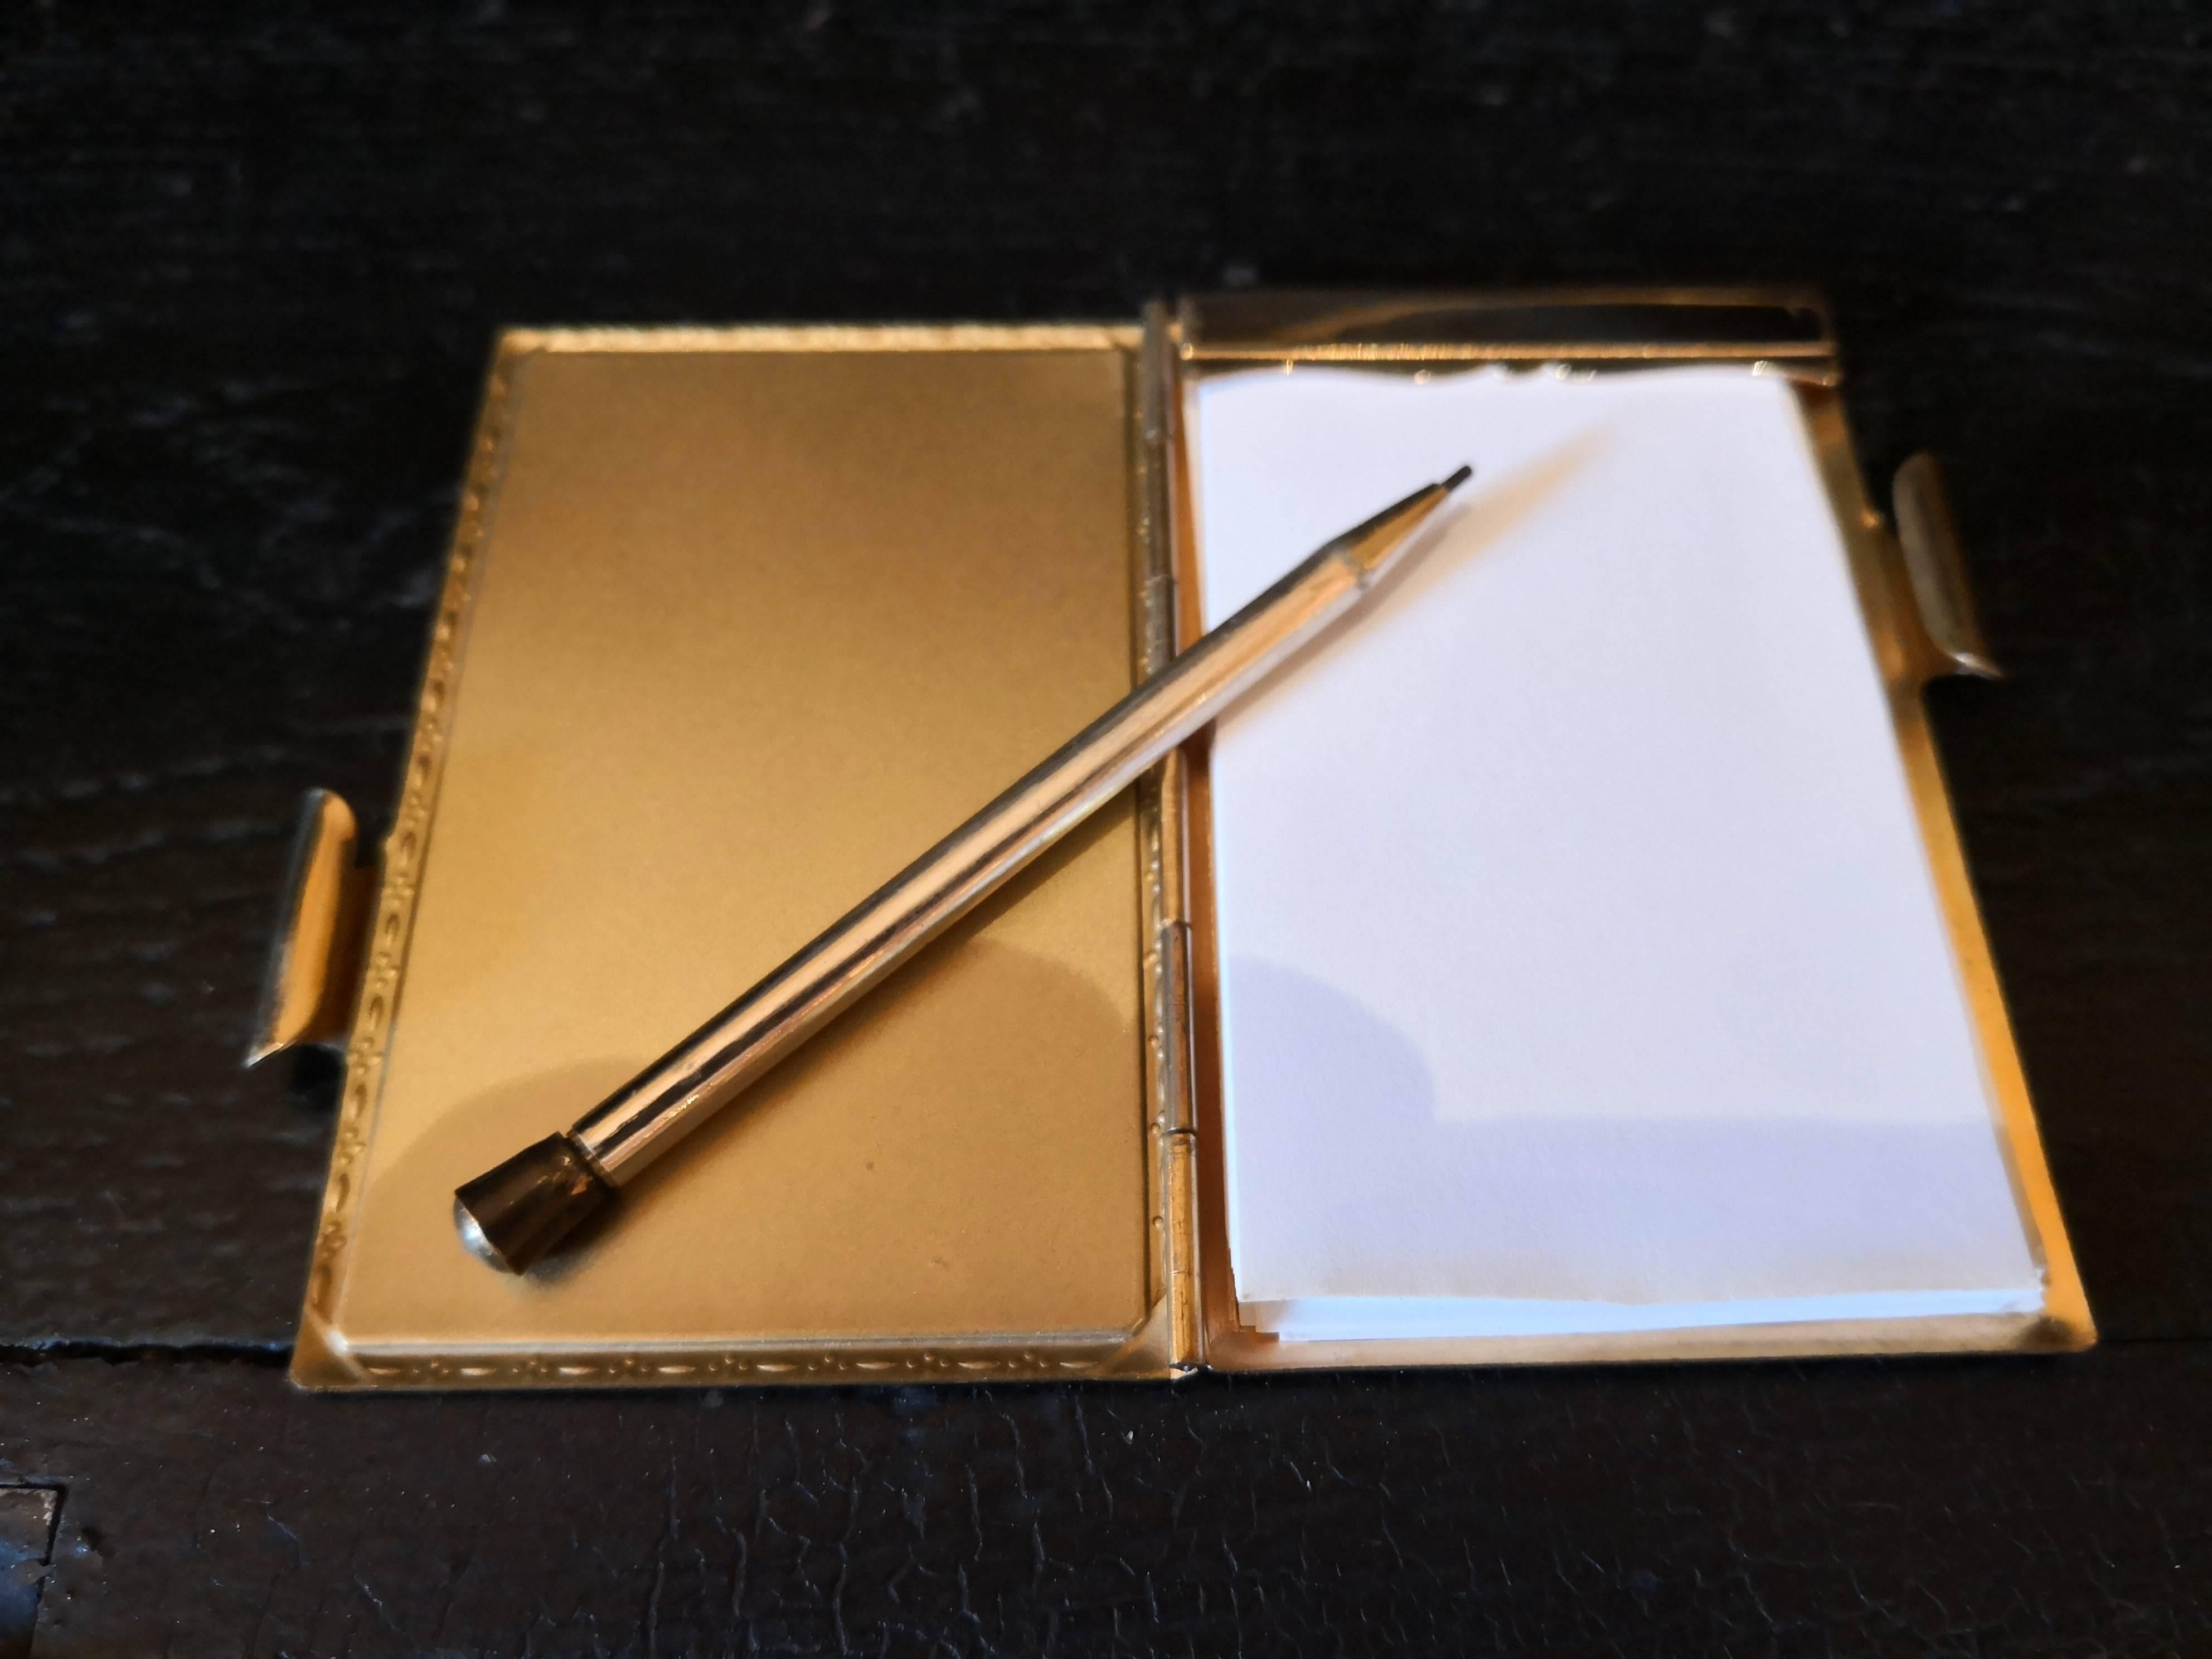 Charming tiny Victorian notebook with a small pencil in turqouise. 
Inside and backside gilded. Enameled cover shows a elegant man with a riding crop and a tophat in the style of Victorian. Inside little papers and on the side a small pencil.